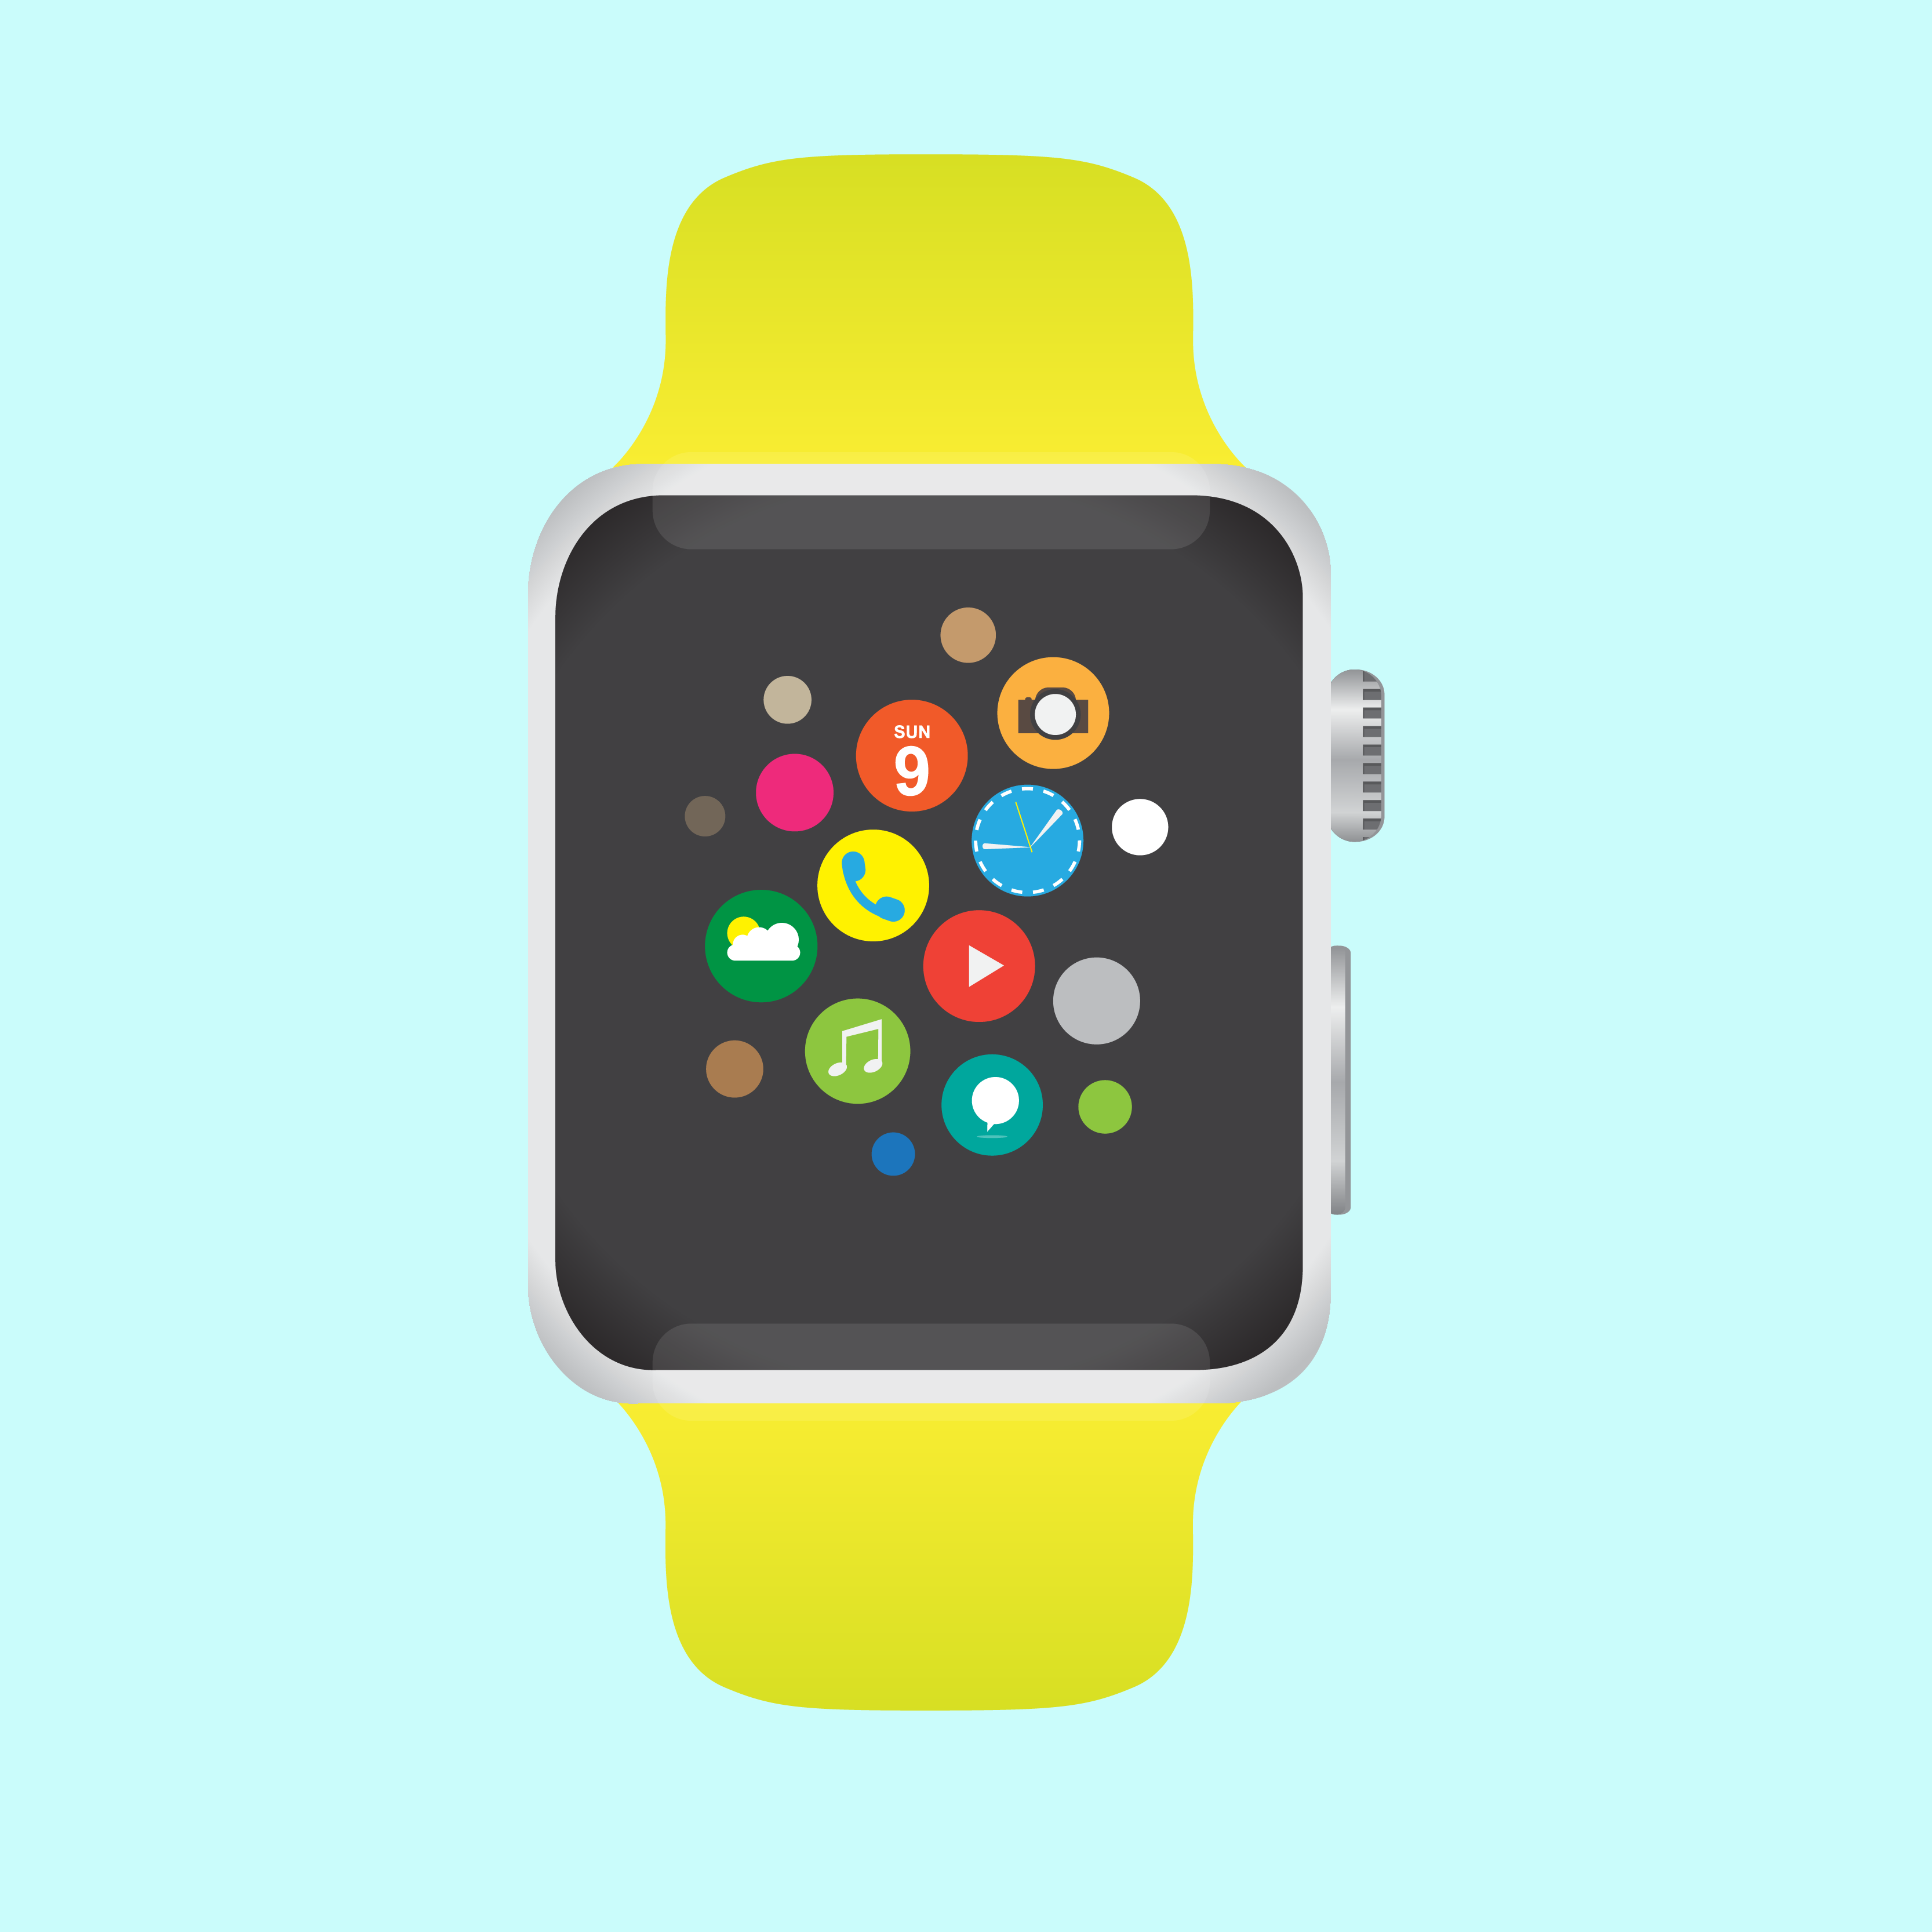 Three Days with the Apple Watch